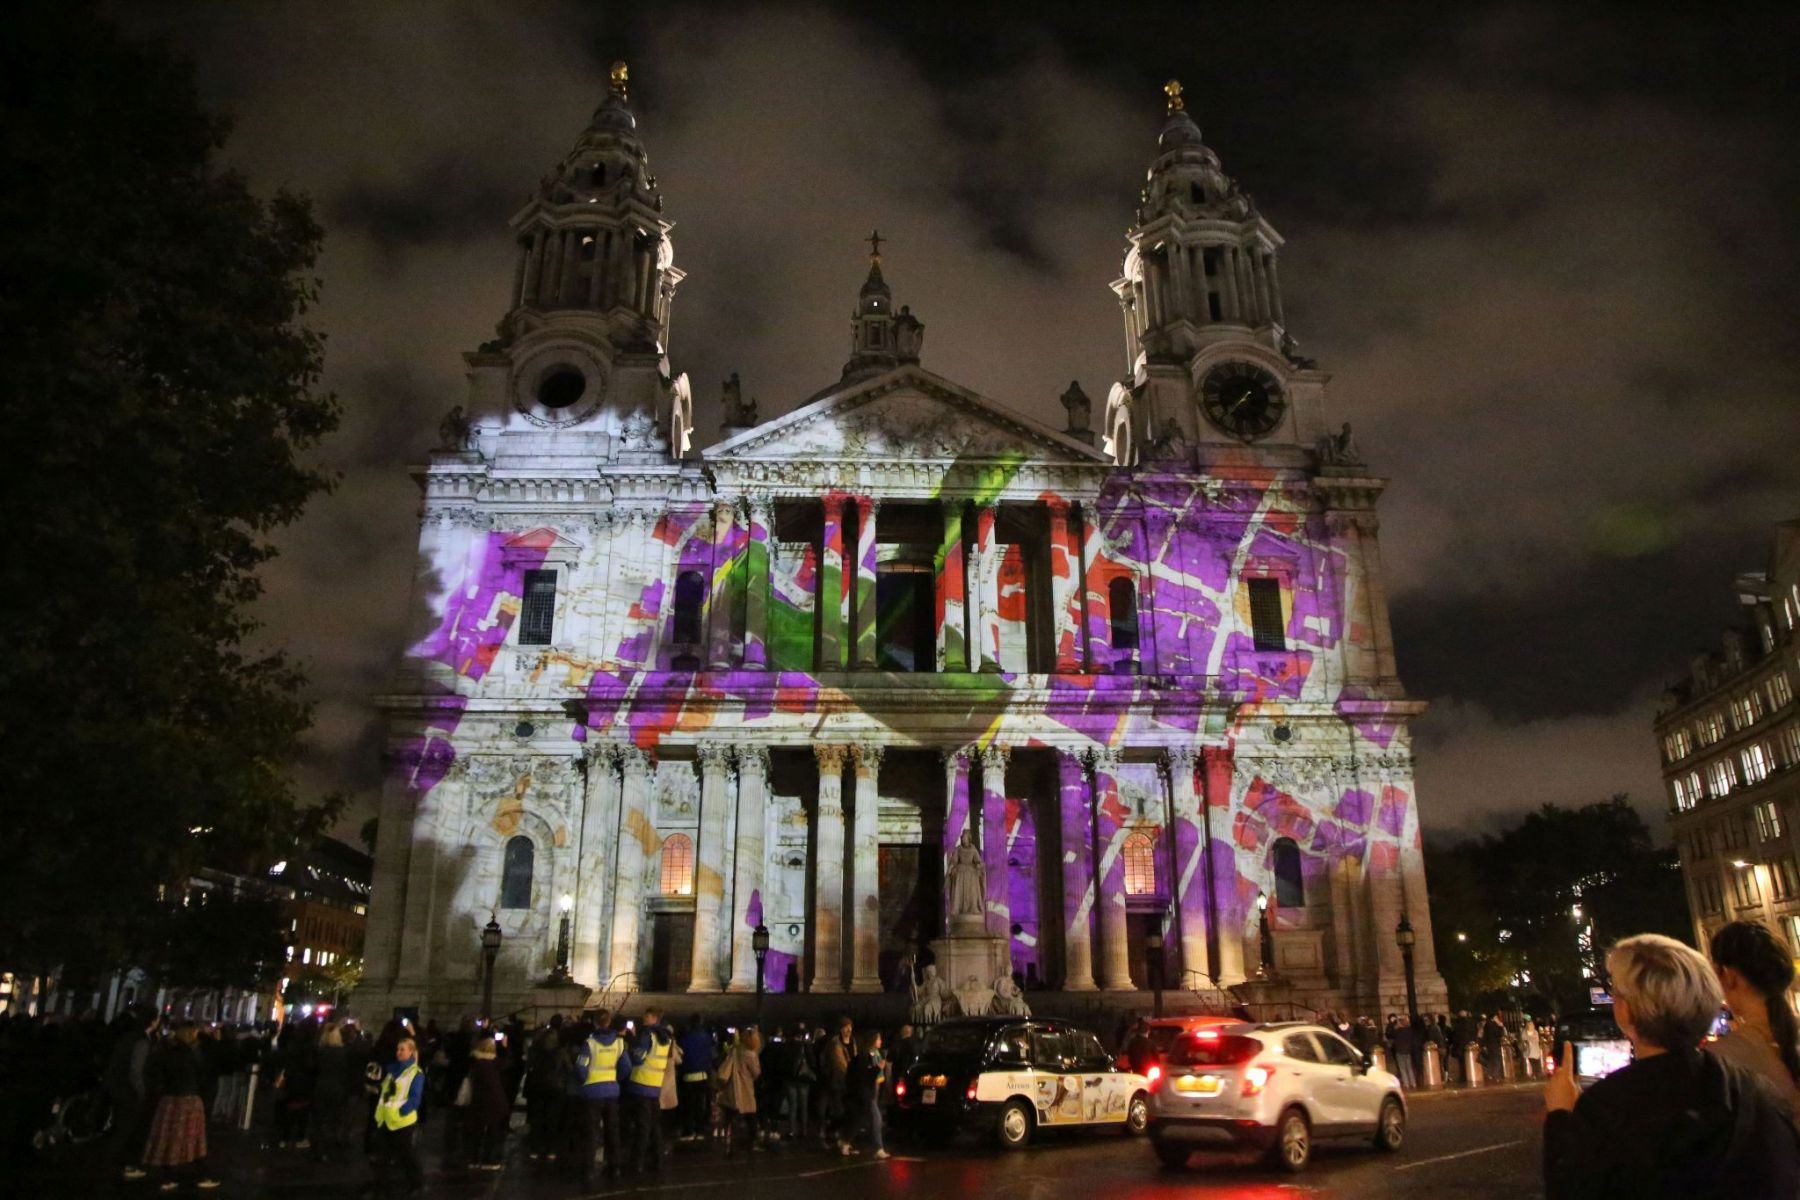 2019 St. Paul's Cathedral Illuminated with projected photos to remember the work of the St. Paul’s Fire Watch who protected the cathedral through the bombing and fires of The Blitz in World War Two